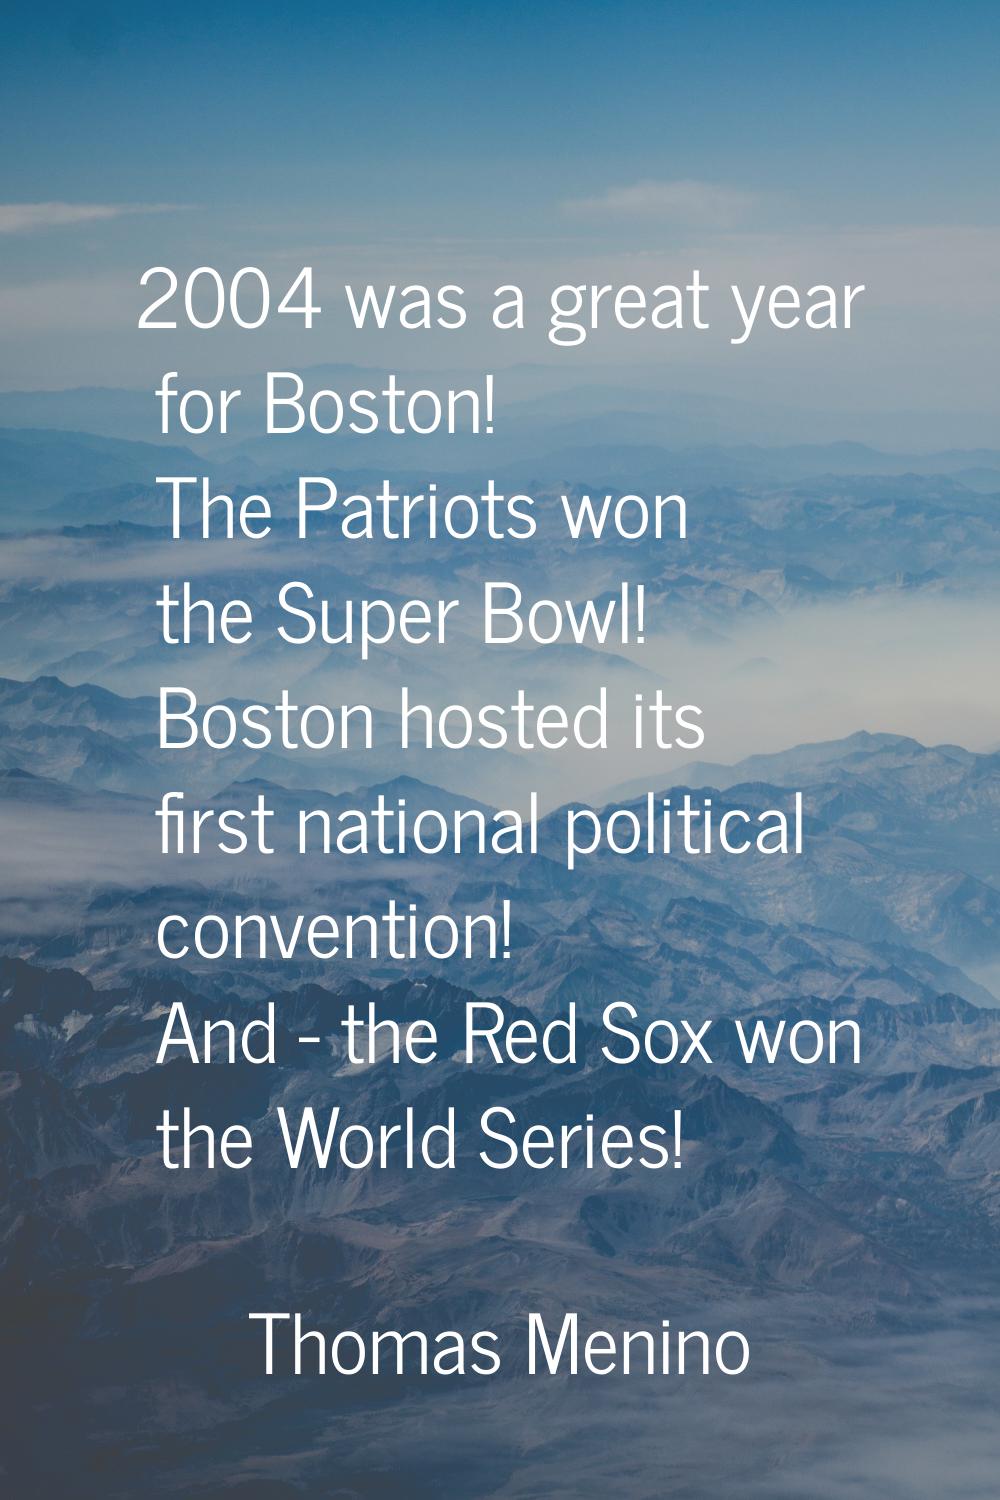 2004 was a great year for Boston! The Patriots won the Super Bowl! Boston hosted its first national